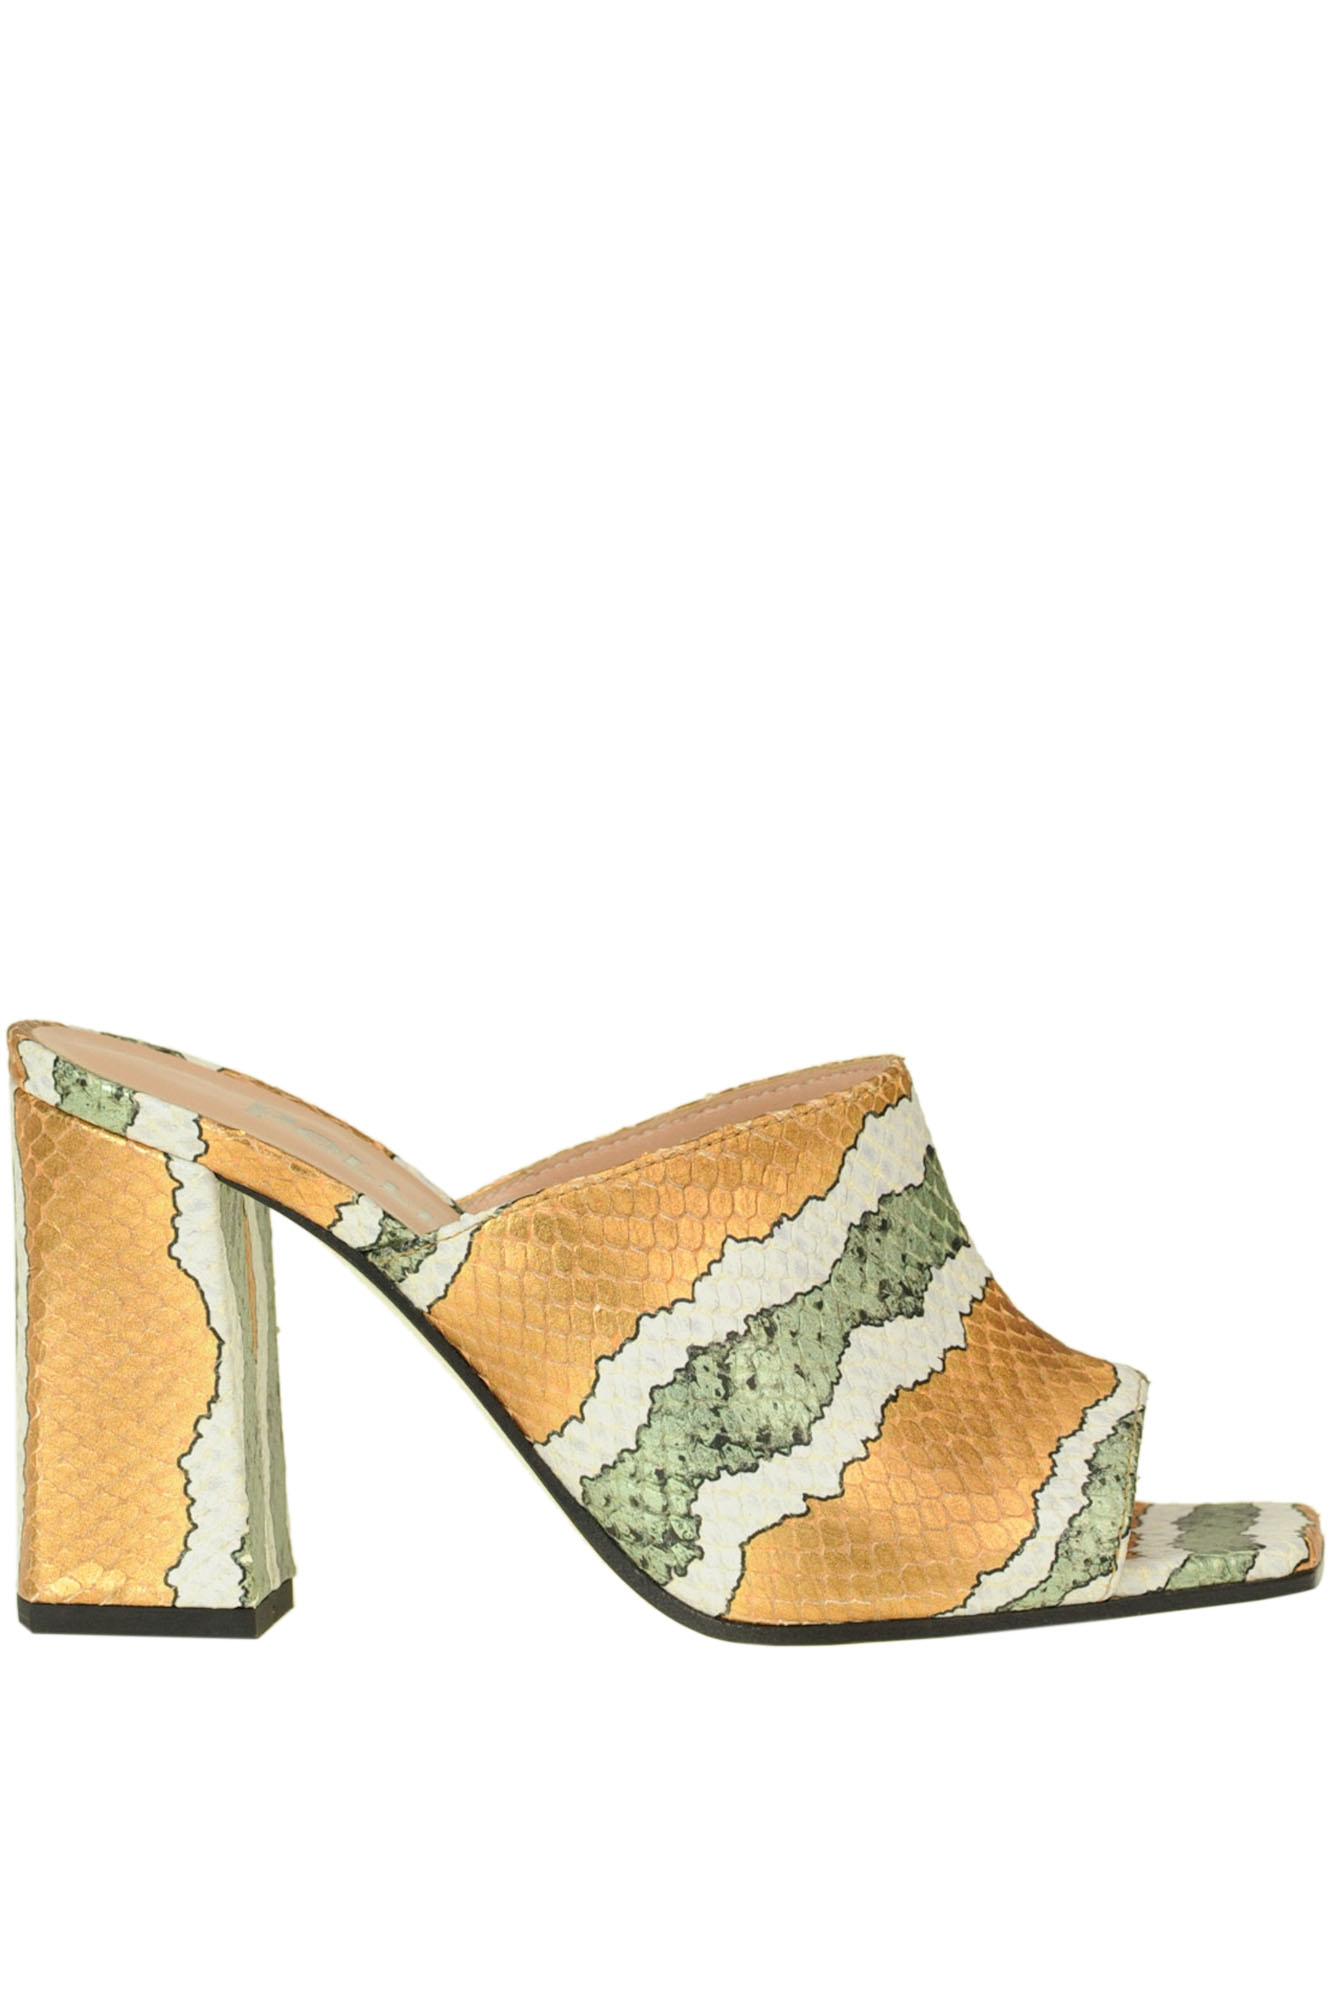 Pollini Reptile print leather mules - Buy online on Glamest Fashion ...